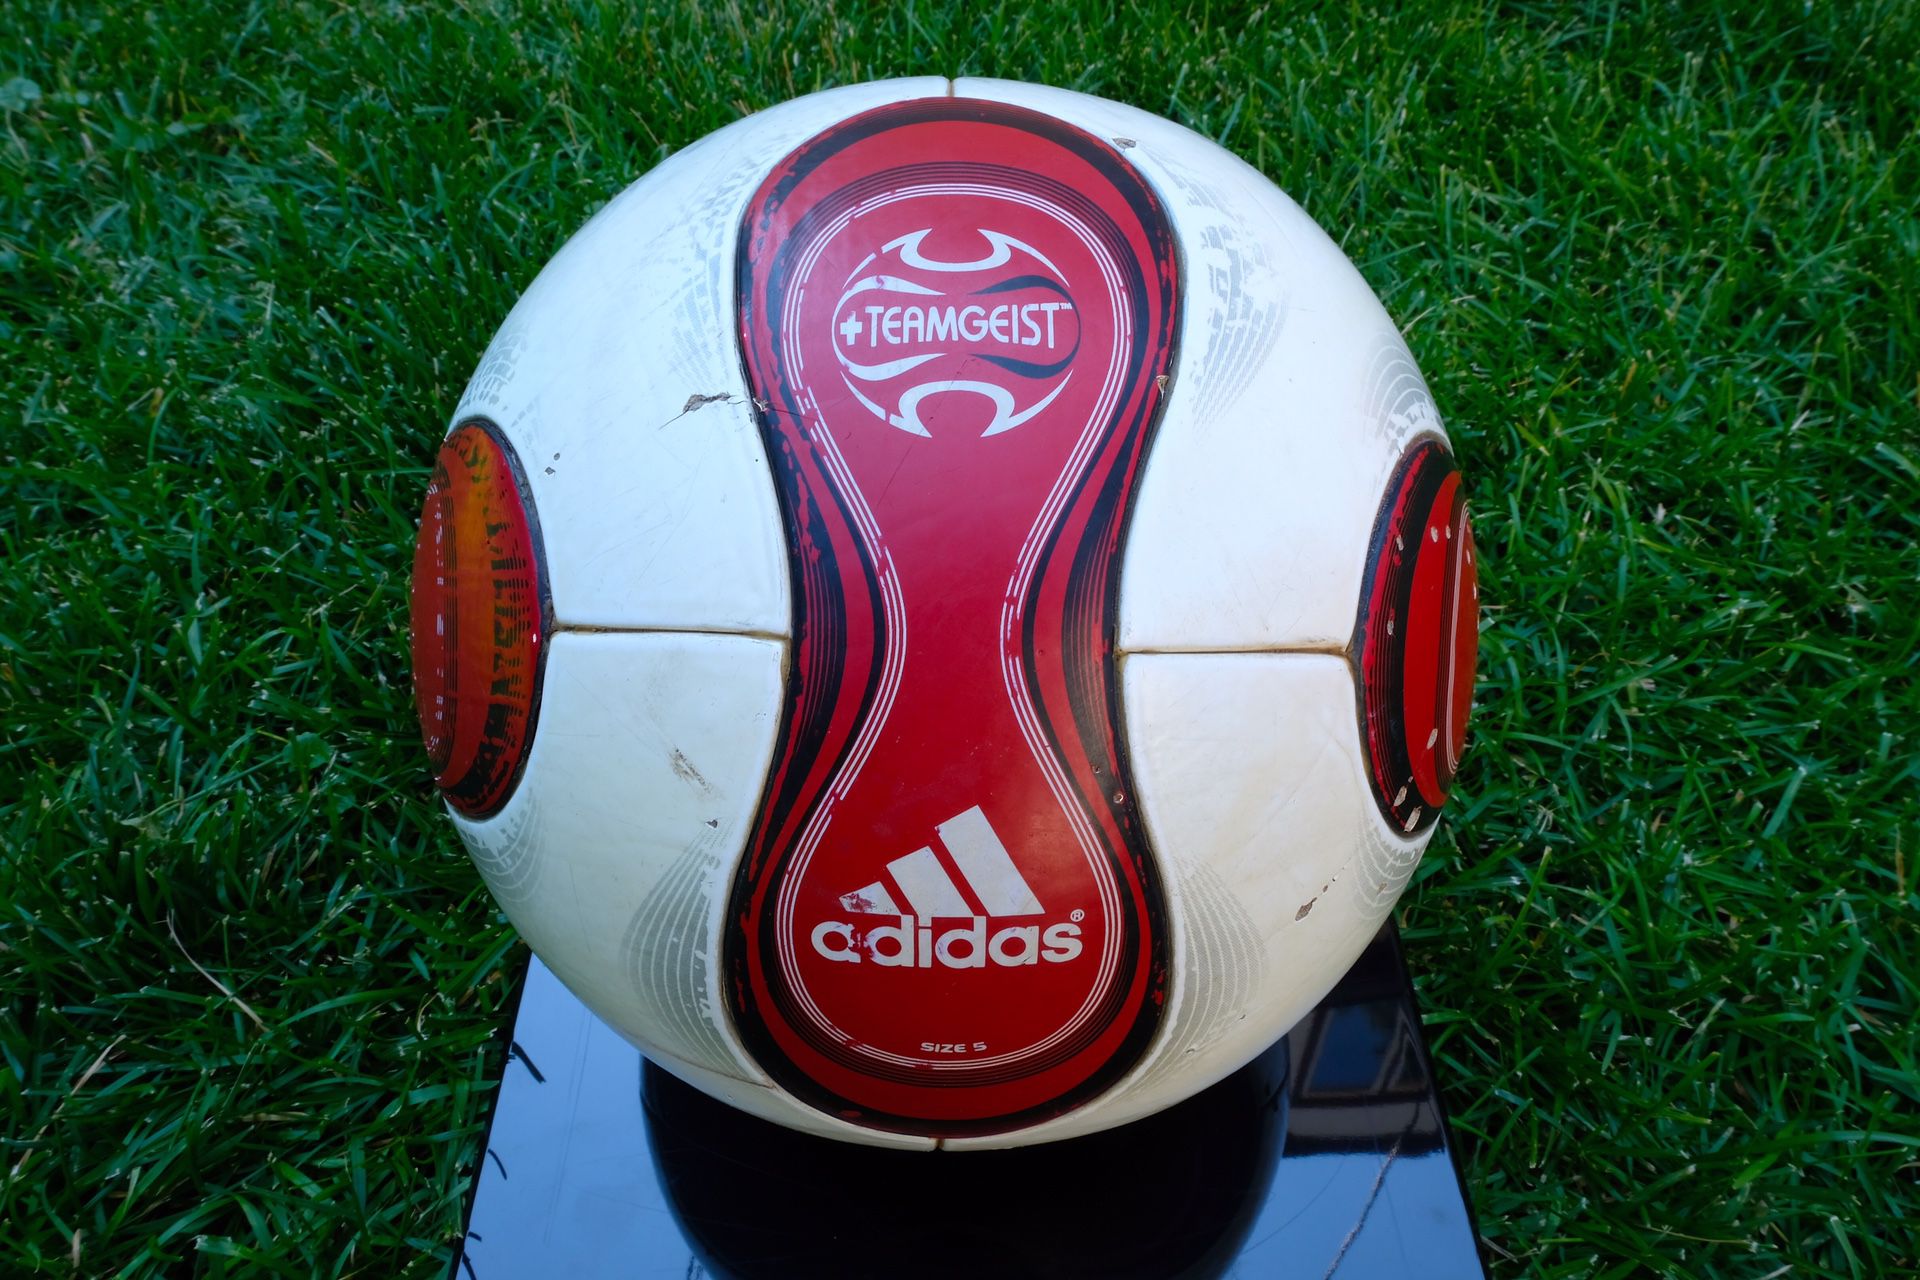 Adidas Teamgeist FIFA World Cup 2006 Official Match Ball, Size 5, Used, hold air Sale in Chicago, IL - OfferUp